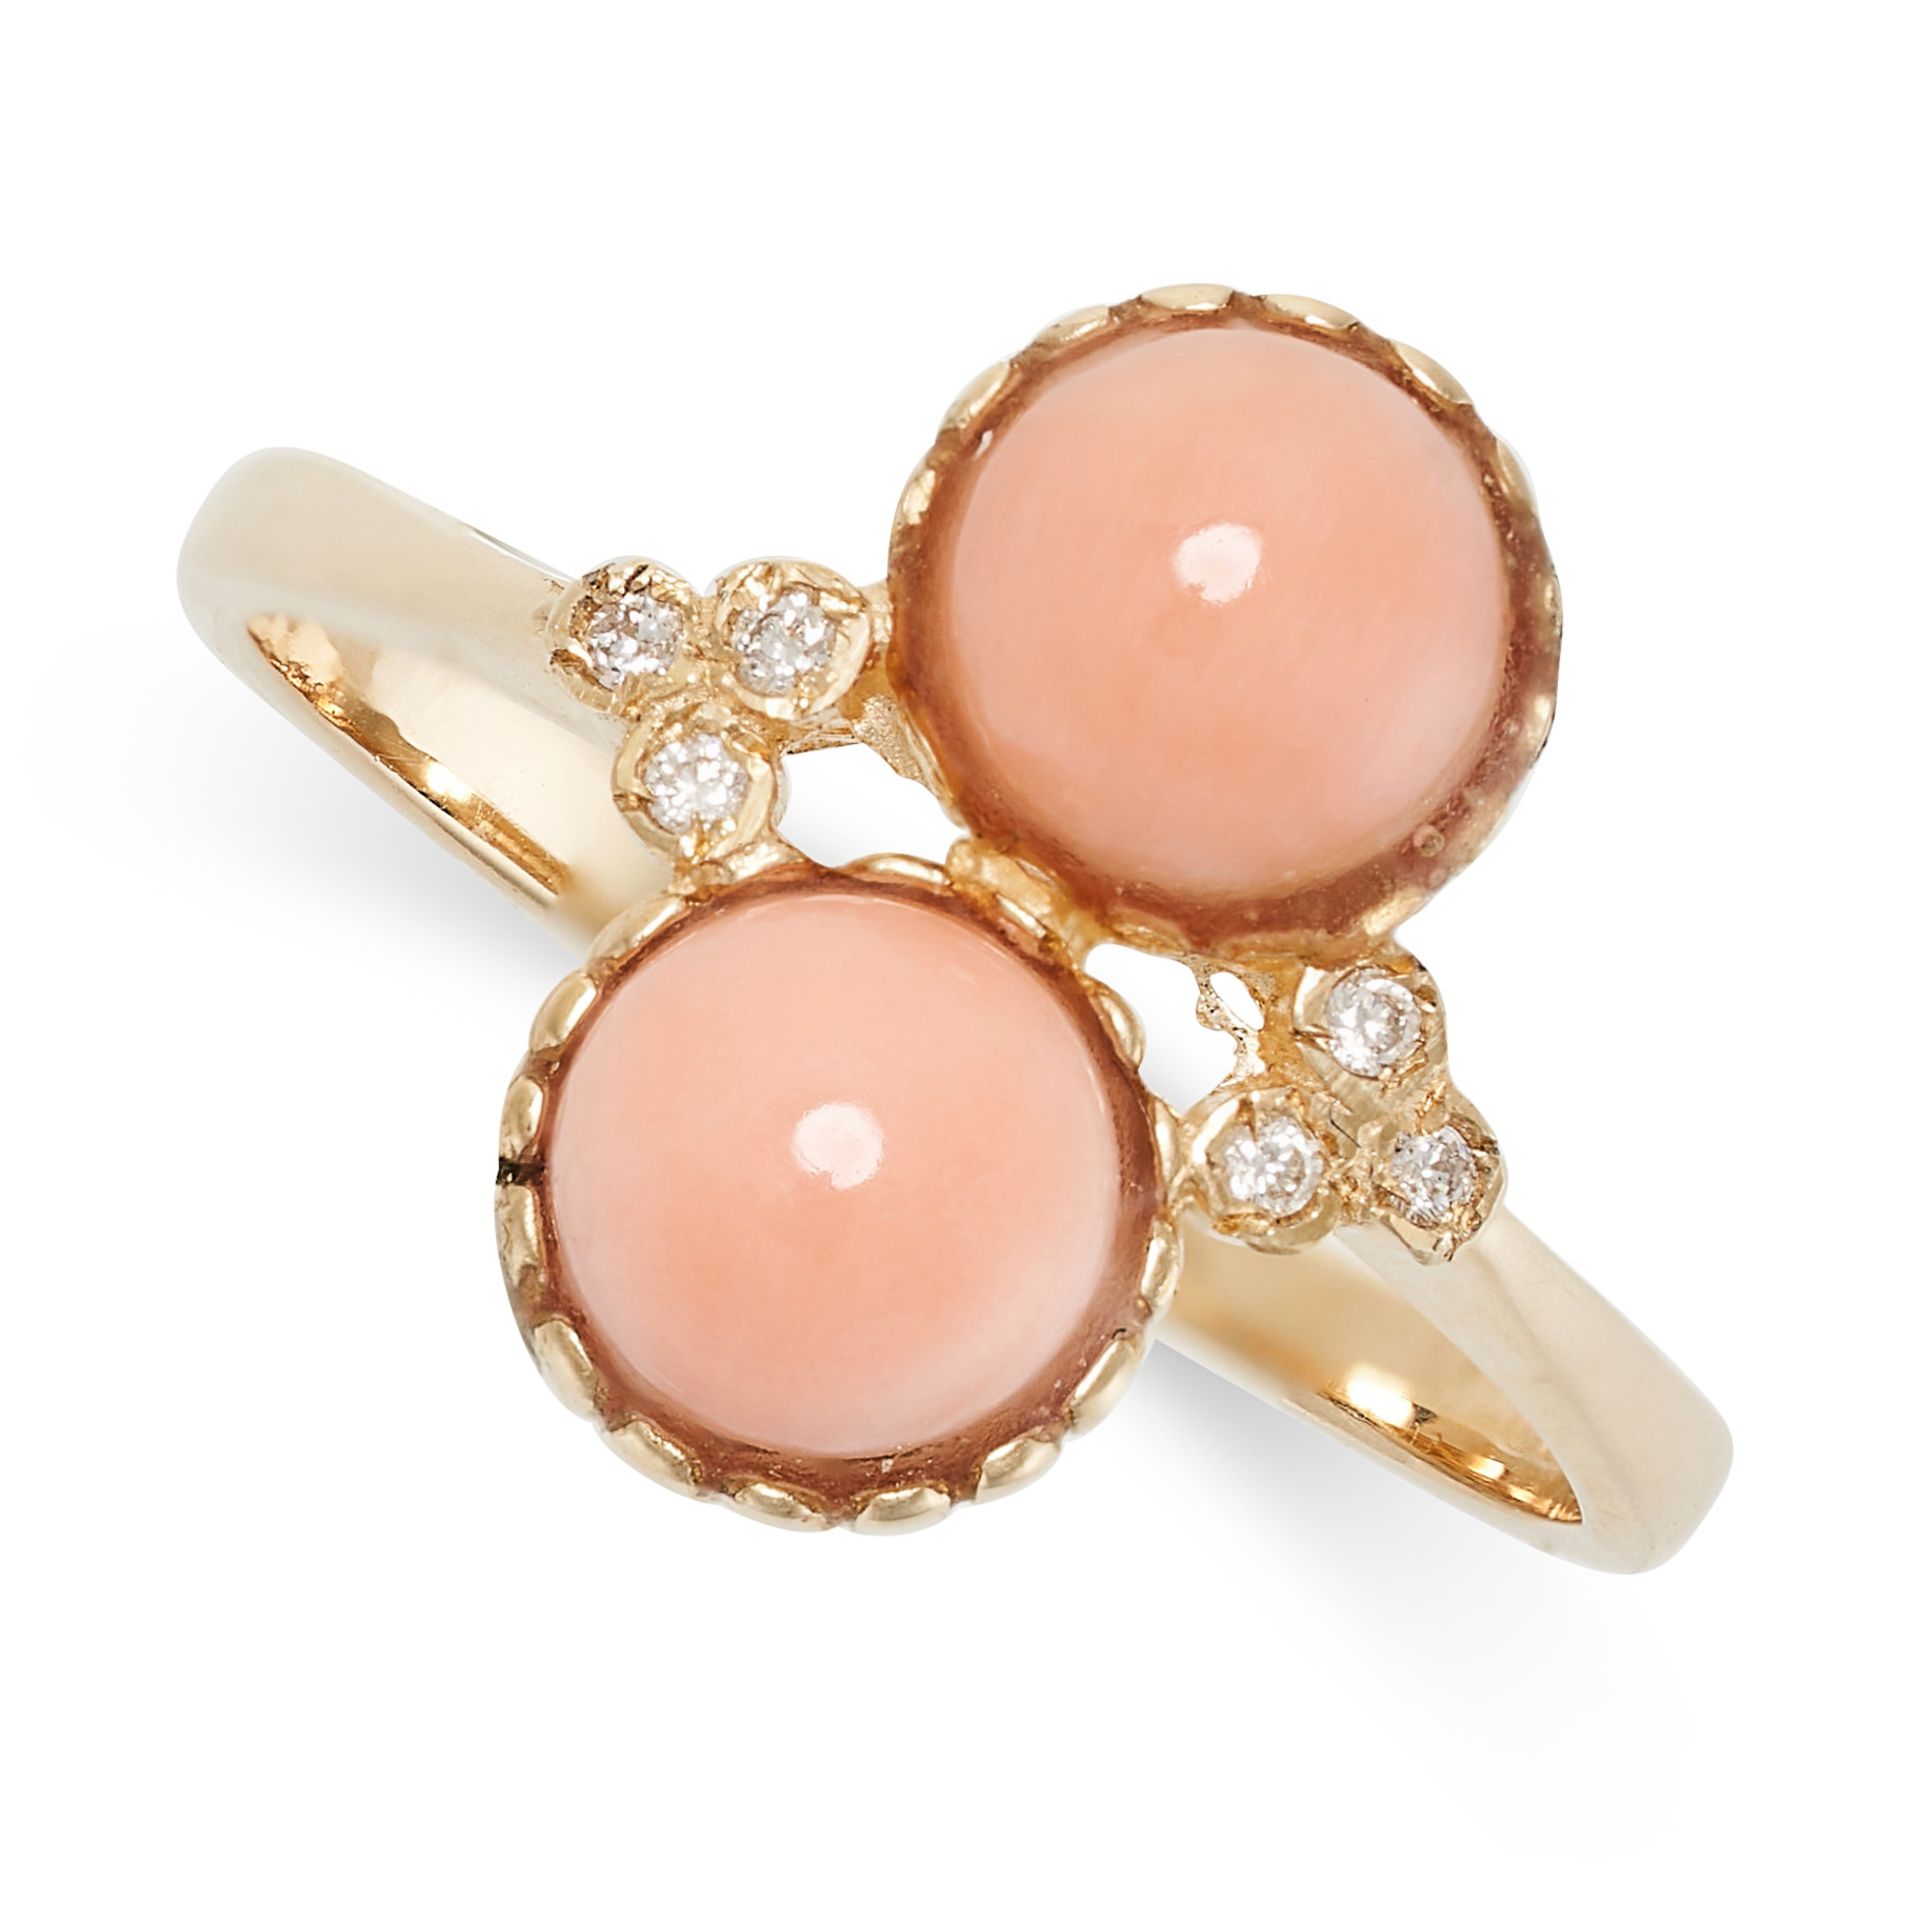 A CORAL AND DIAMOND RING in 9ct gold, set with two round polished pieces of pink coral, accented